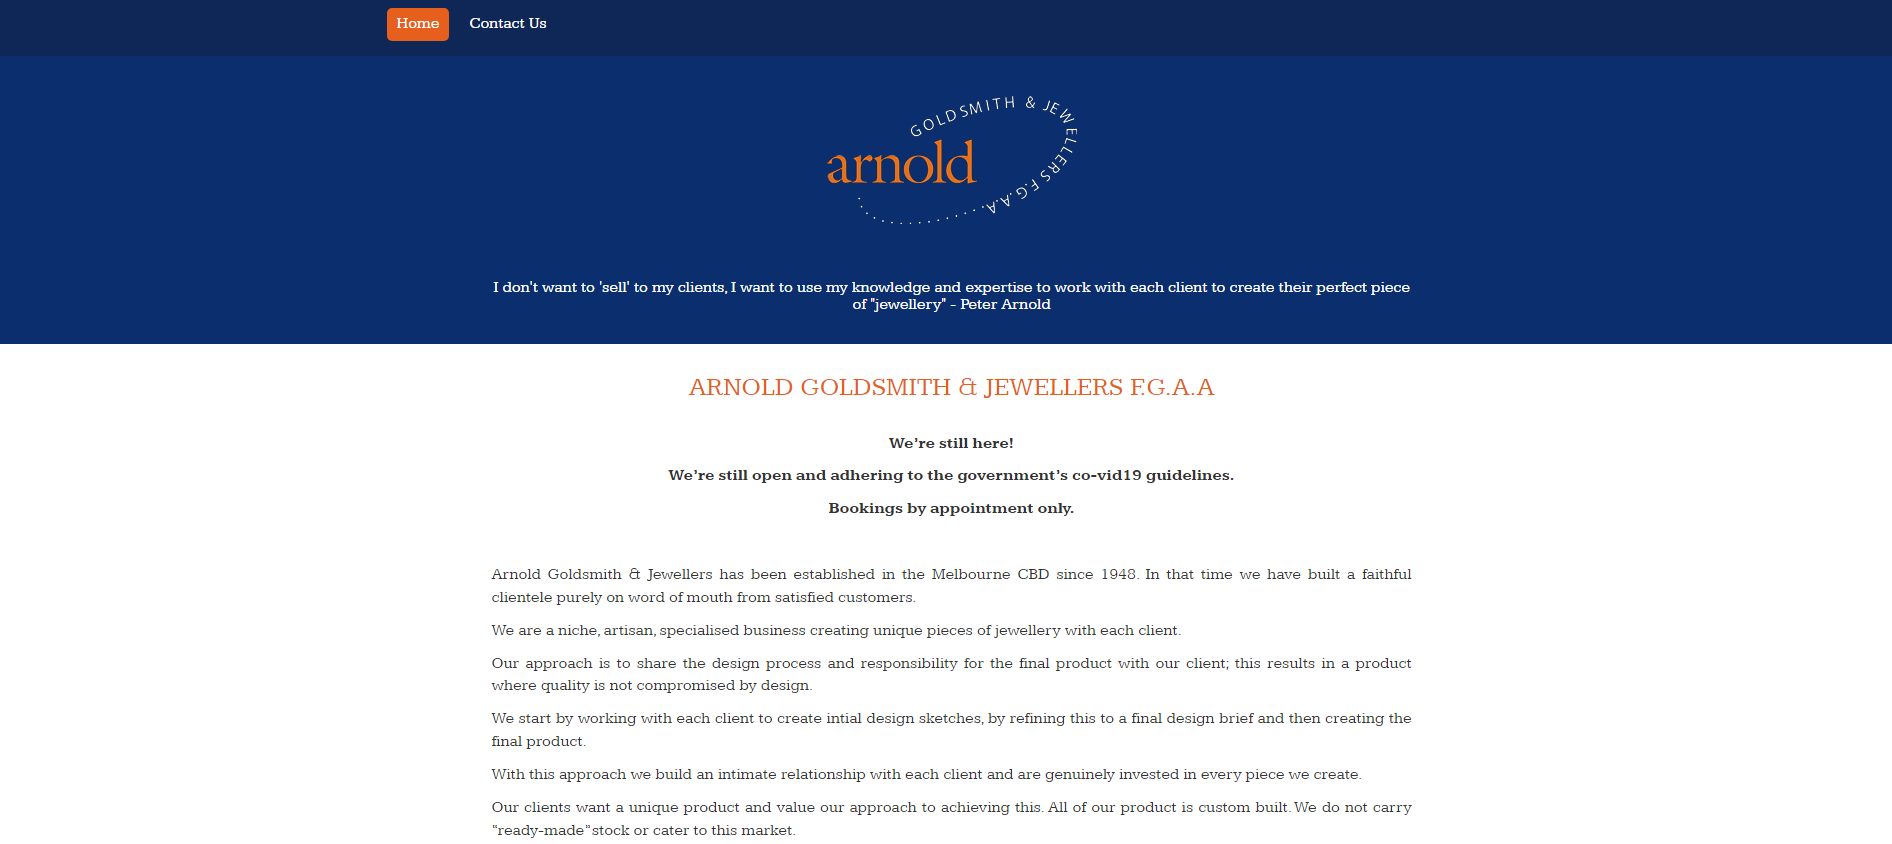 arnold goldsmith & jewellers engagement rings & wedding band shop melbourne